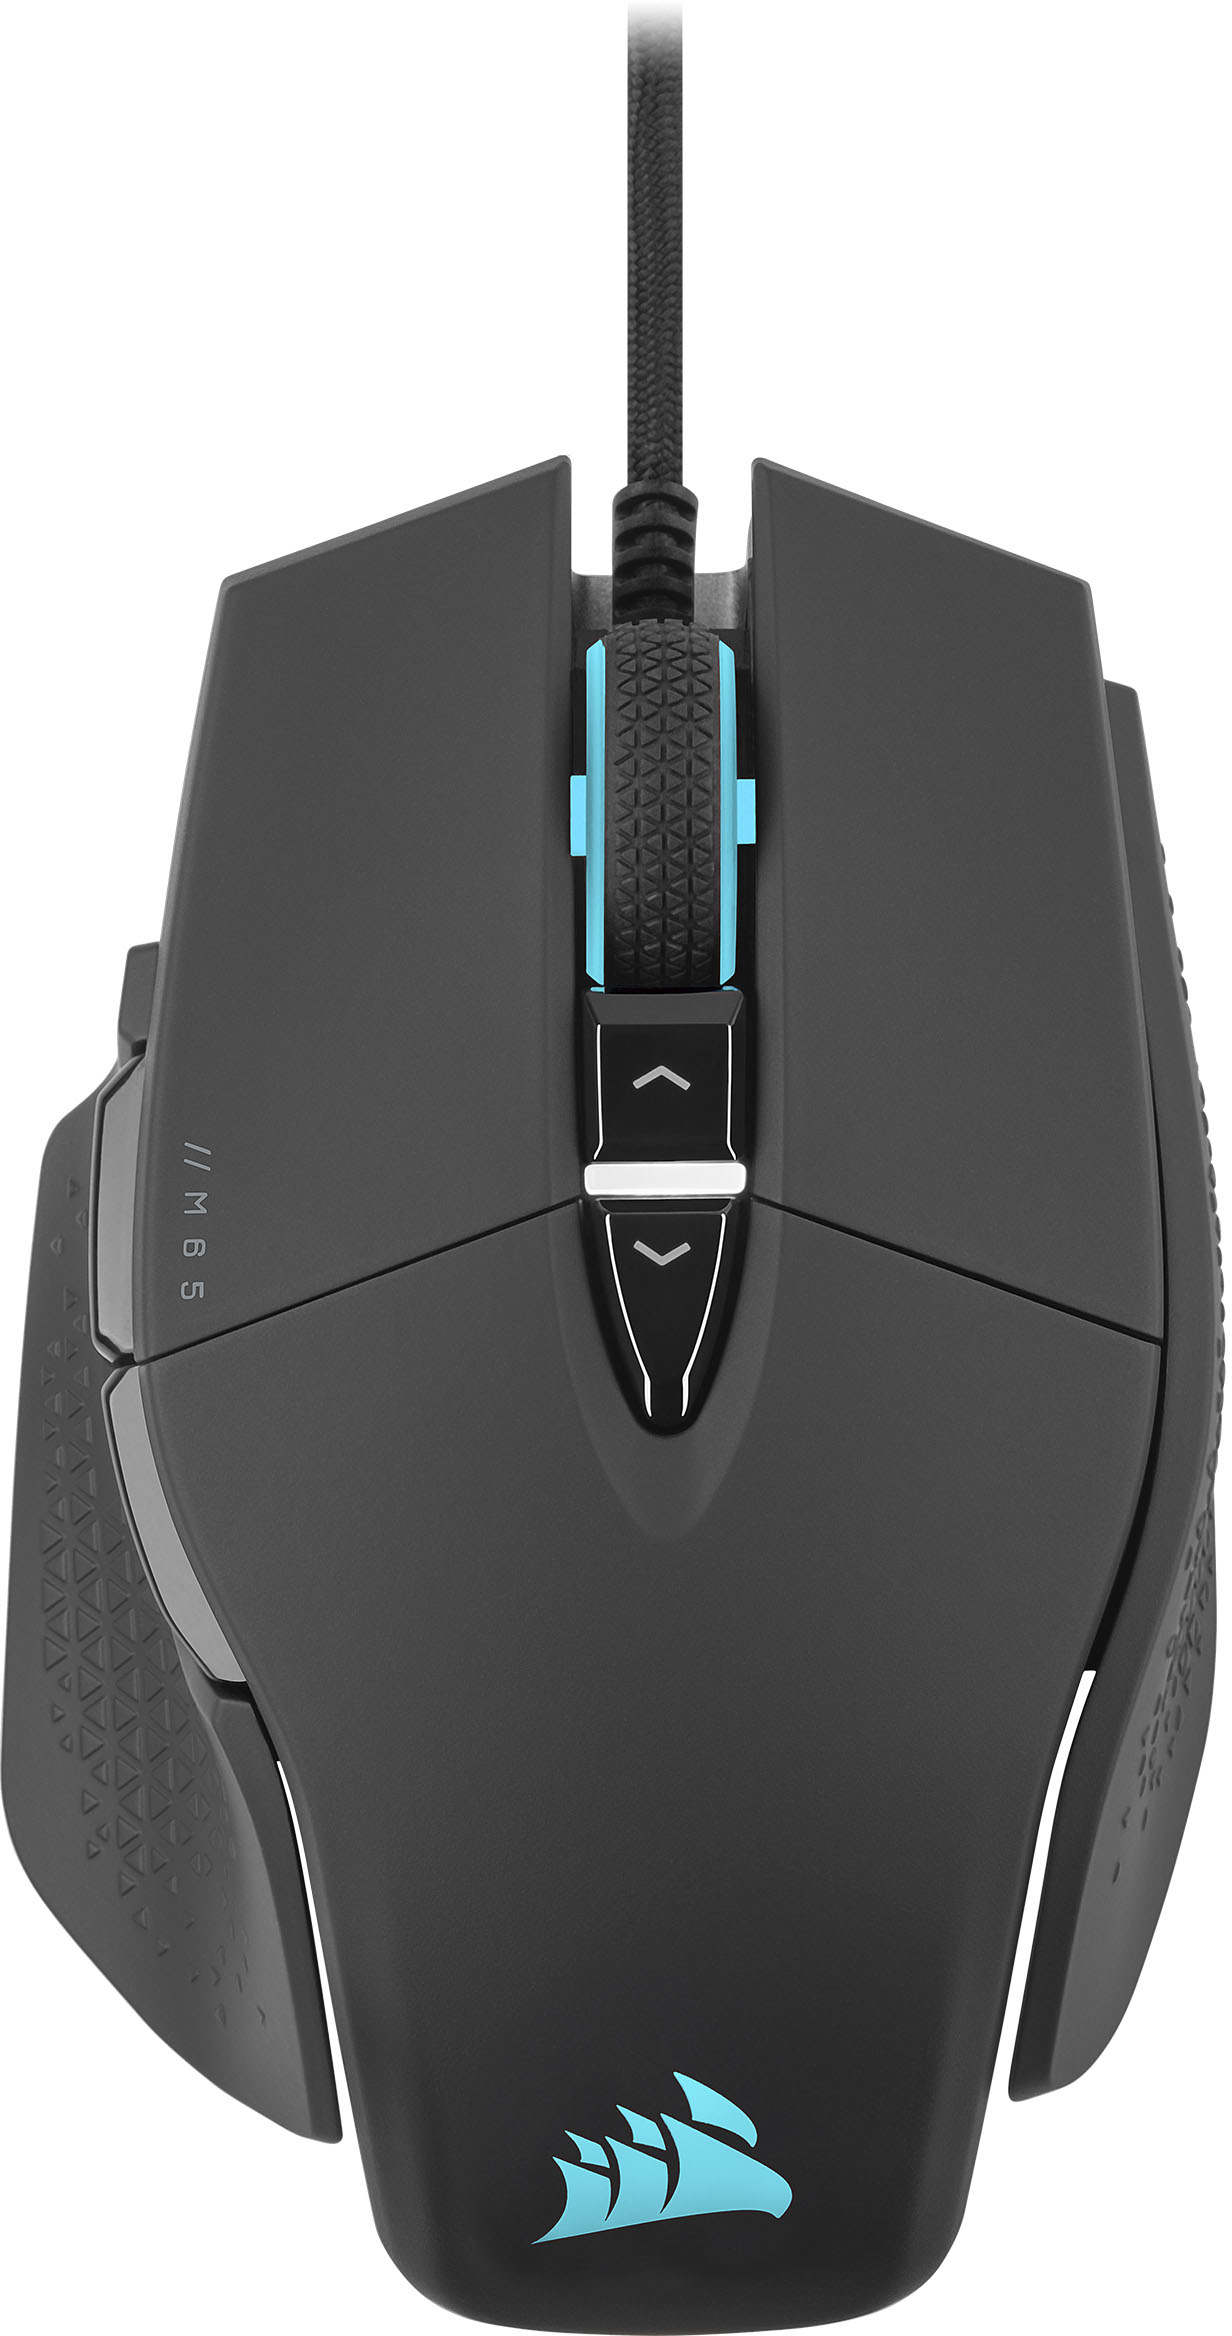 Mouse Optical Adjustable Gaming Weights Buy with - RGB CORSAIR CH-9309411-NA2 Ultra Black M65 Wired Best